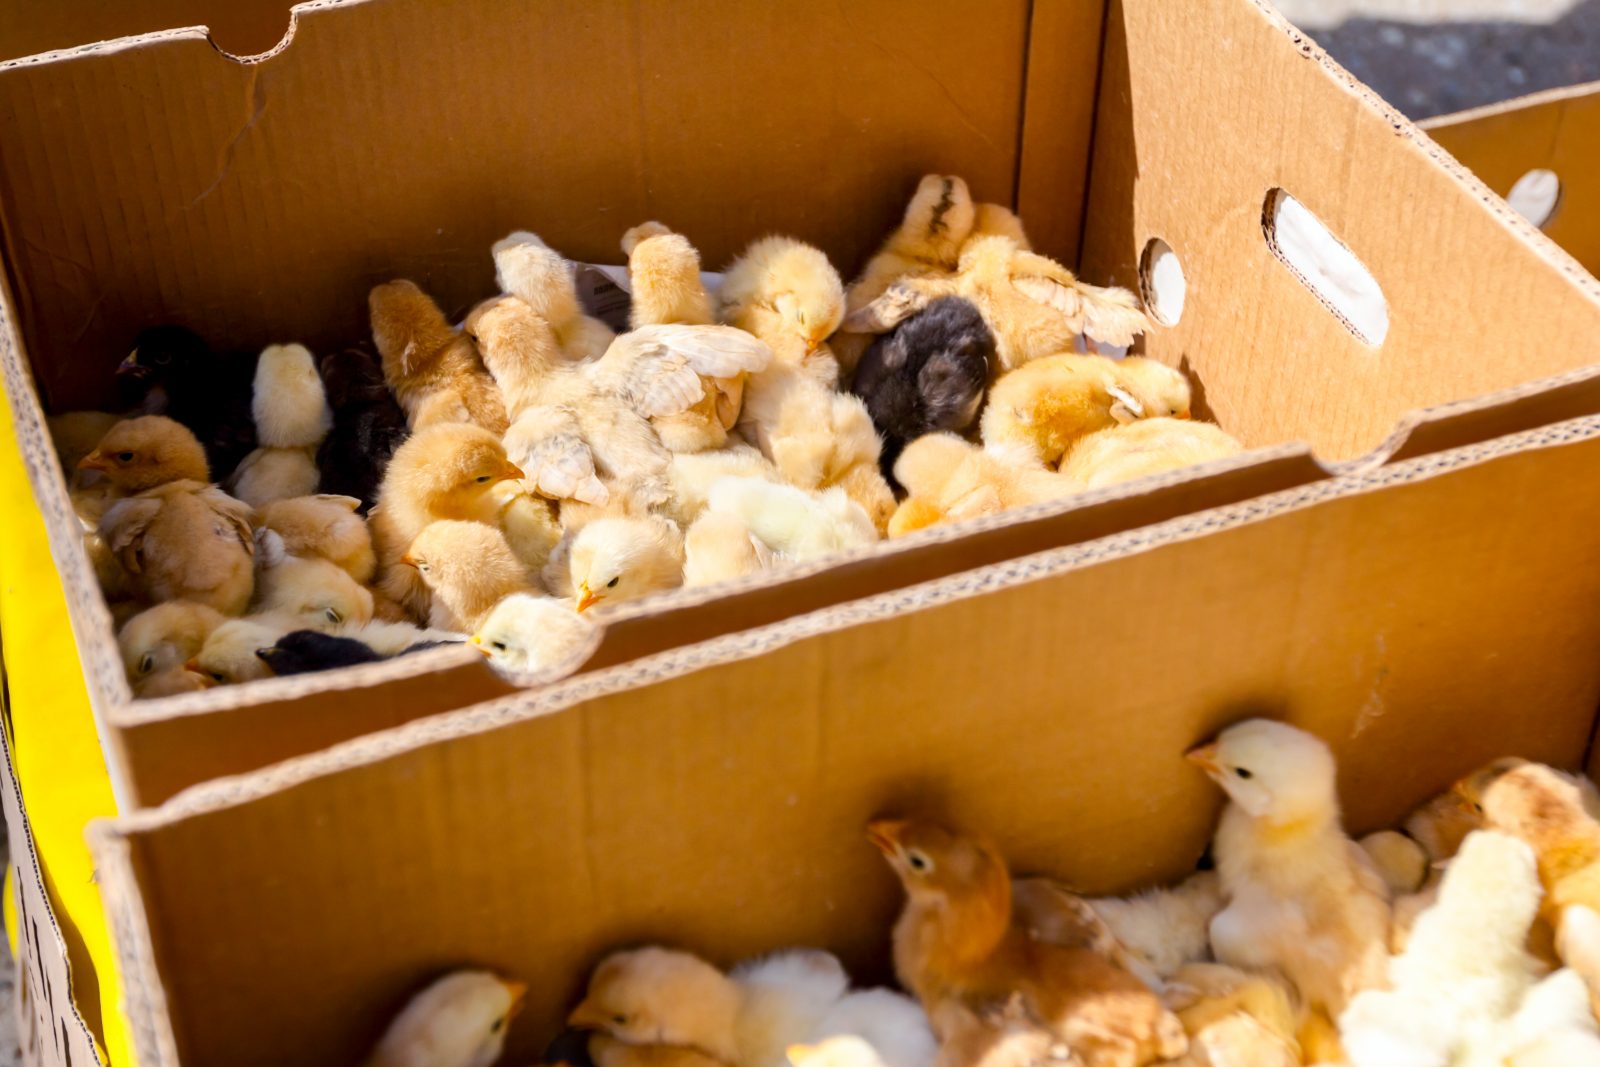 A box full of baby chicks.